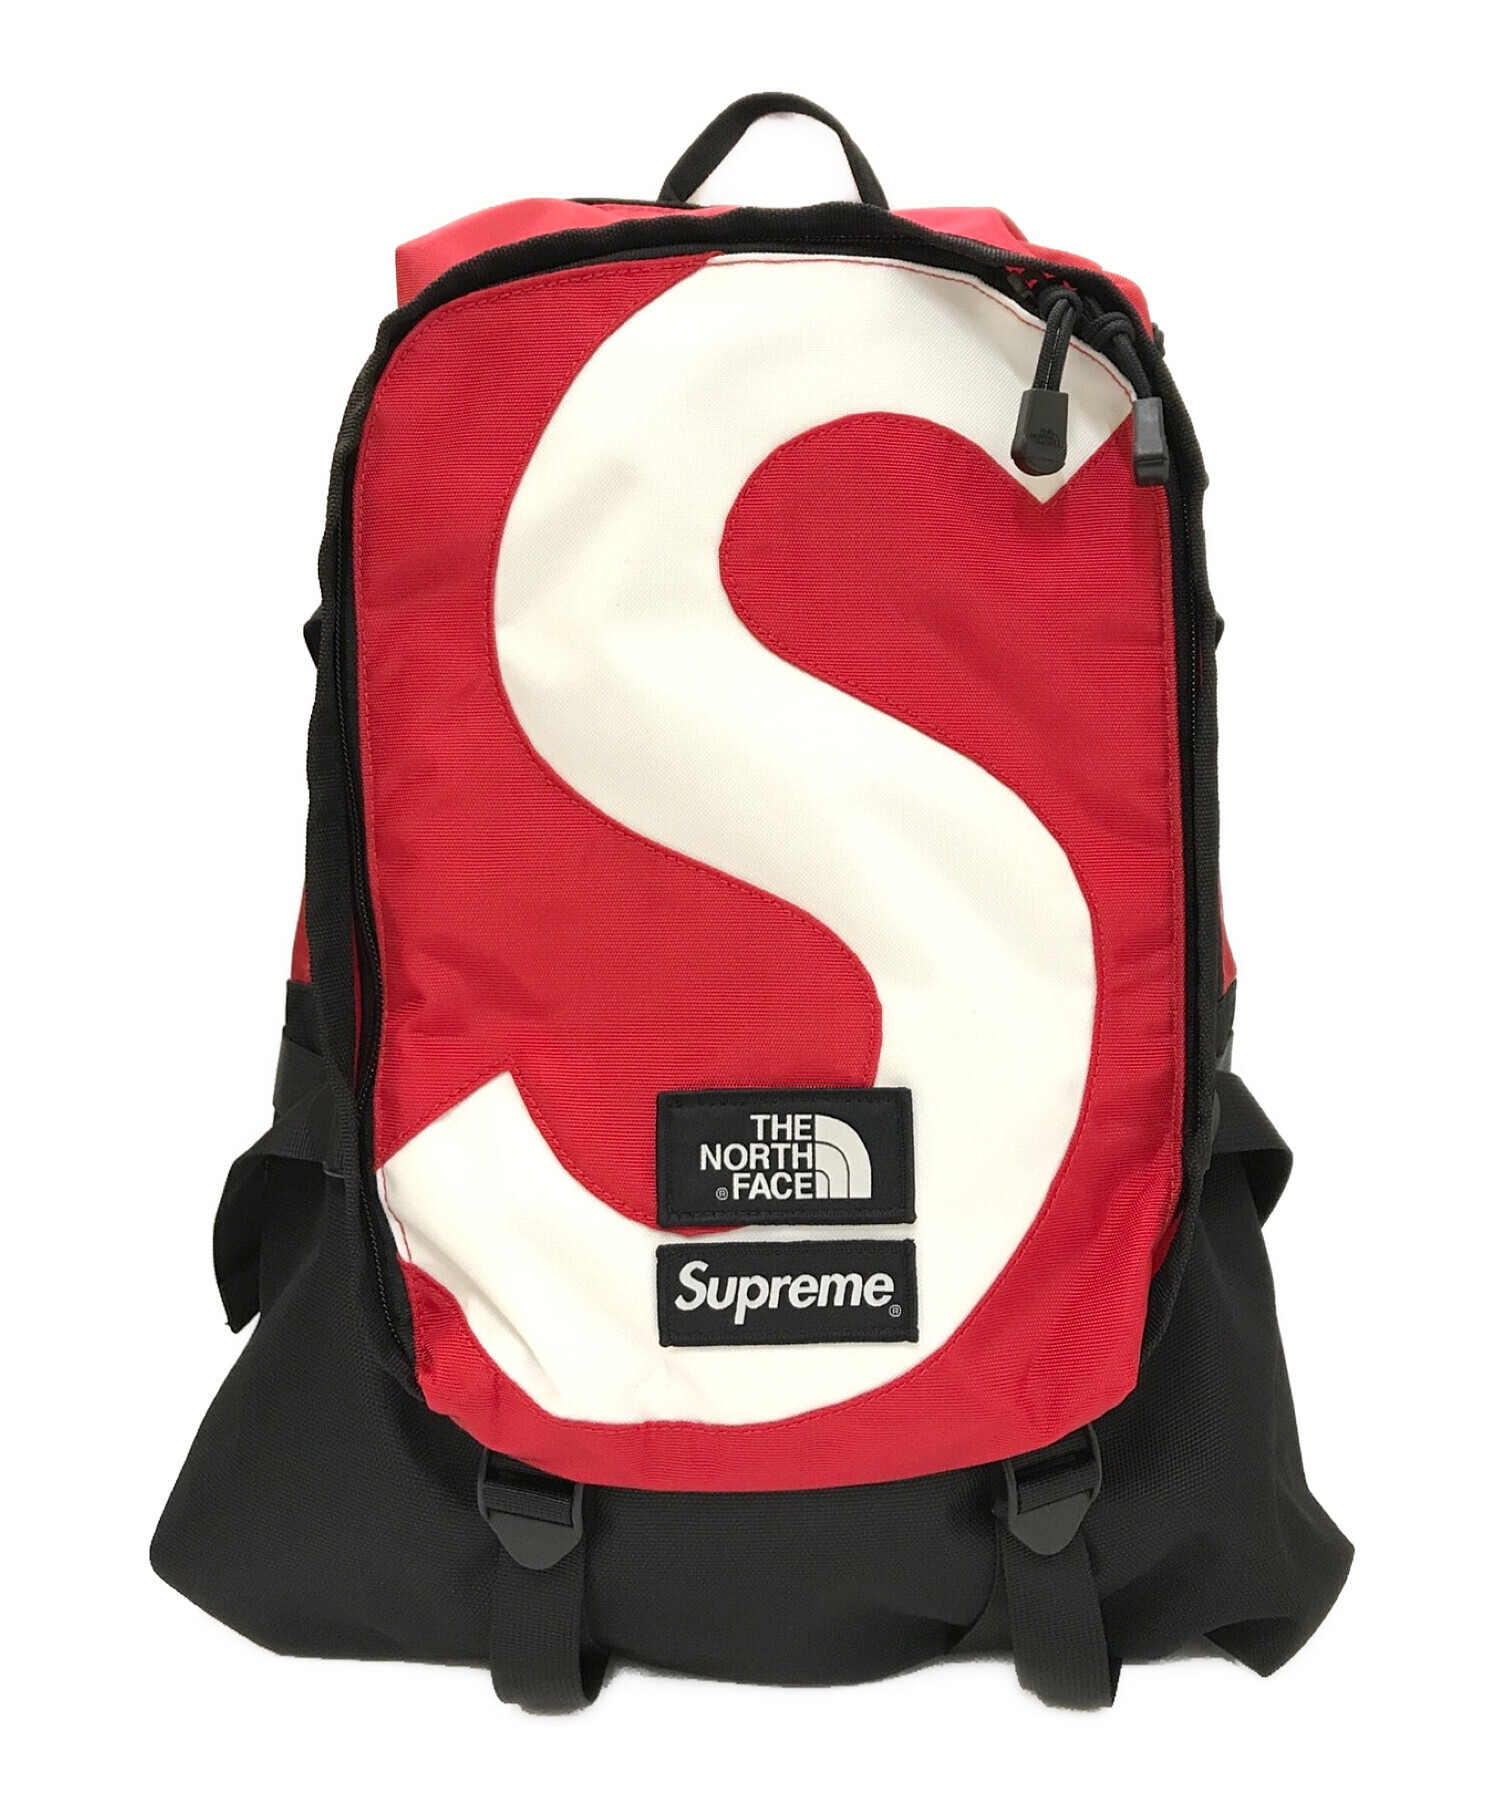 SUPREME×THE NORTH FACE (シュプリーム × ザノースフェイス) S Logo Expedition Backpack レッド  未使用品